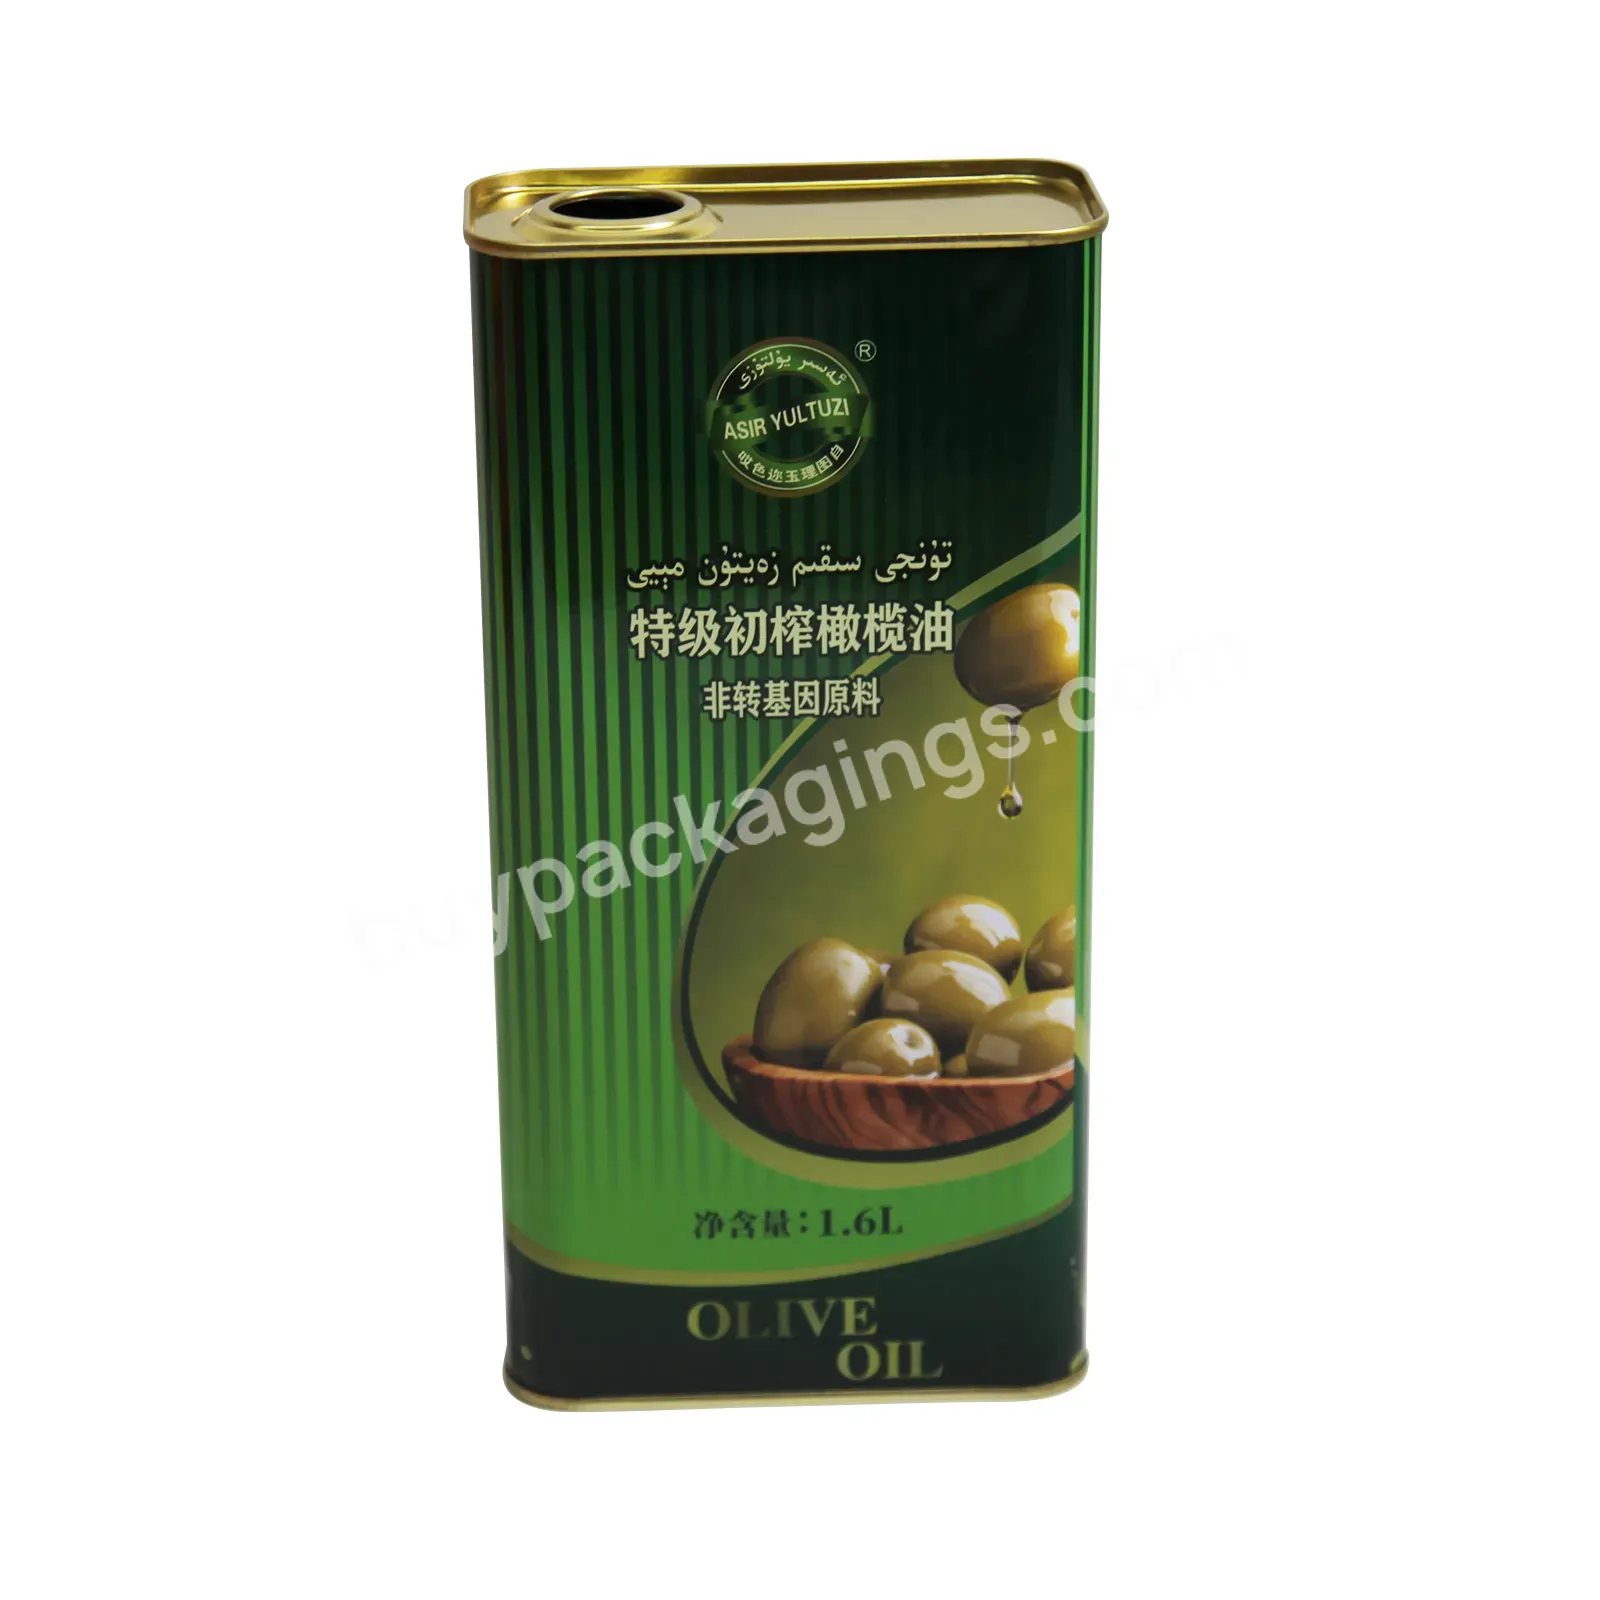 Empty 0.1-5l Square Olive Oil Metal Can - Buy Square Tin Cans,Olive Oil Tin Cans,Empty Tin Can.